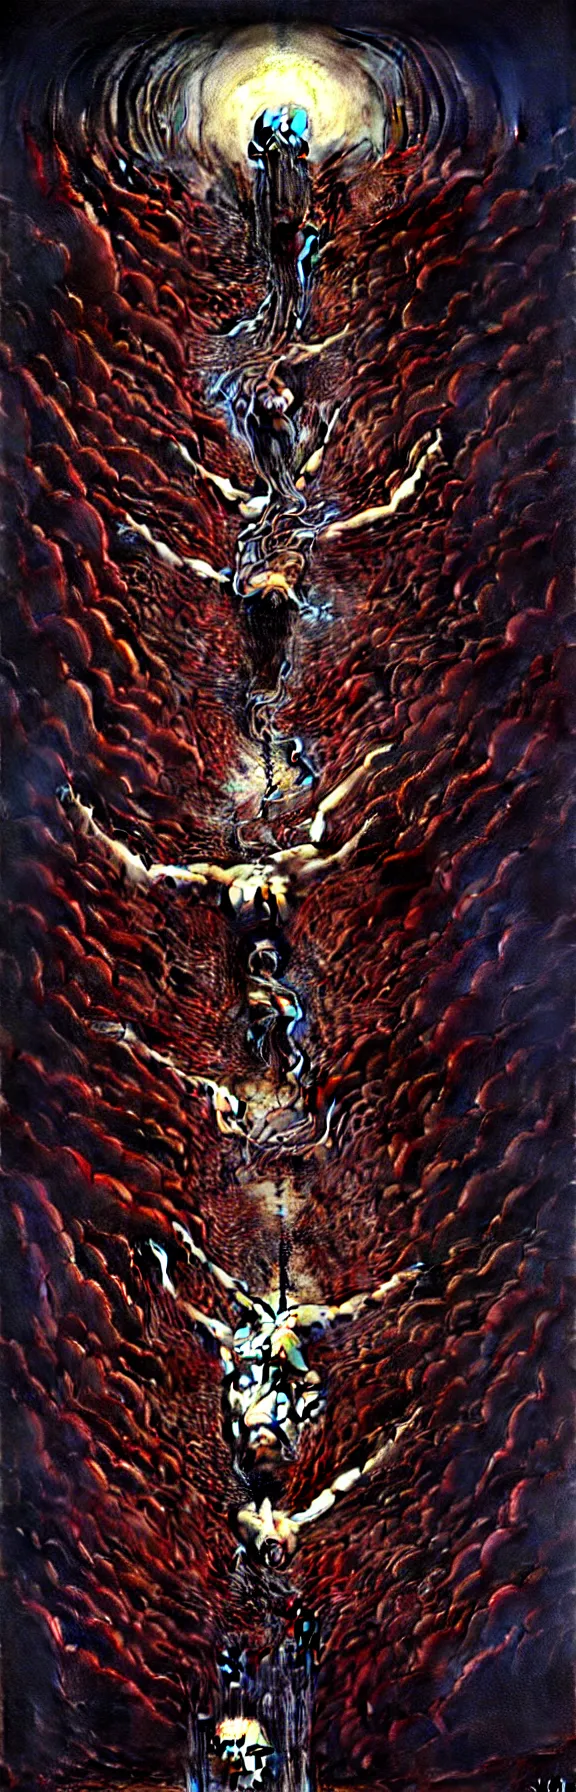 Image similar to ”the storm of god, releasing angels and bloodshed from above”, by h.r Giger, beksinski, and Caravaggio